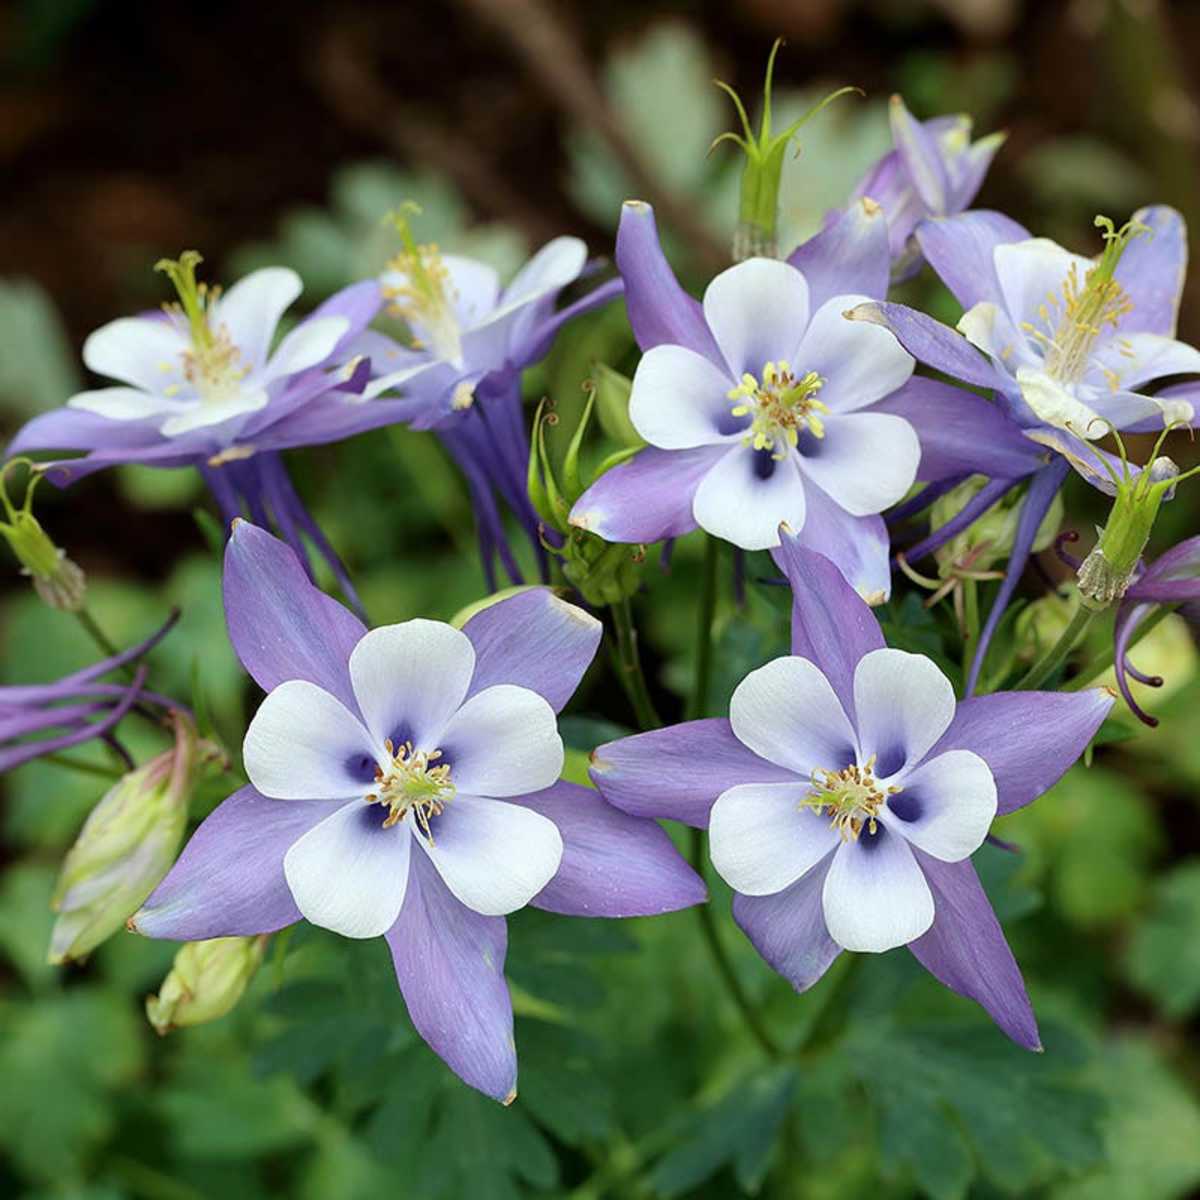 Plants That Produce Flowers With 5 Petals for A Lovely Flower Garden ...